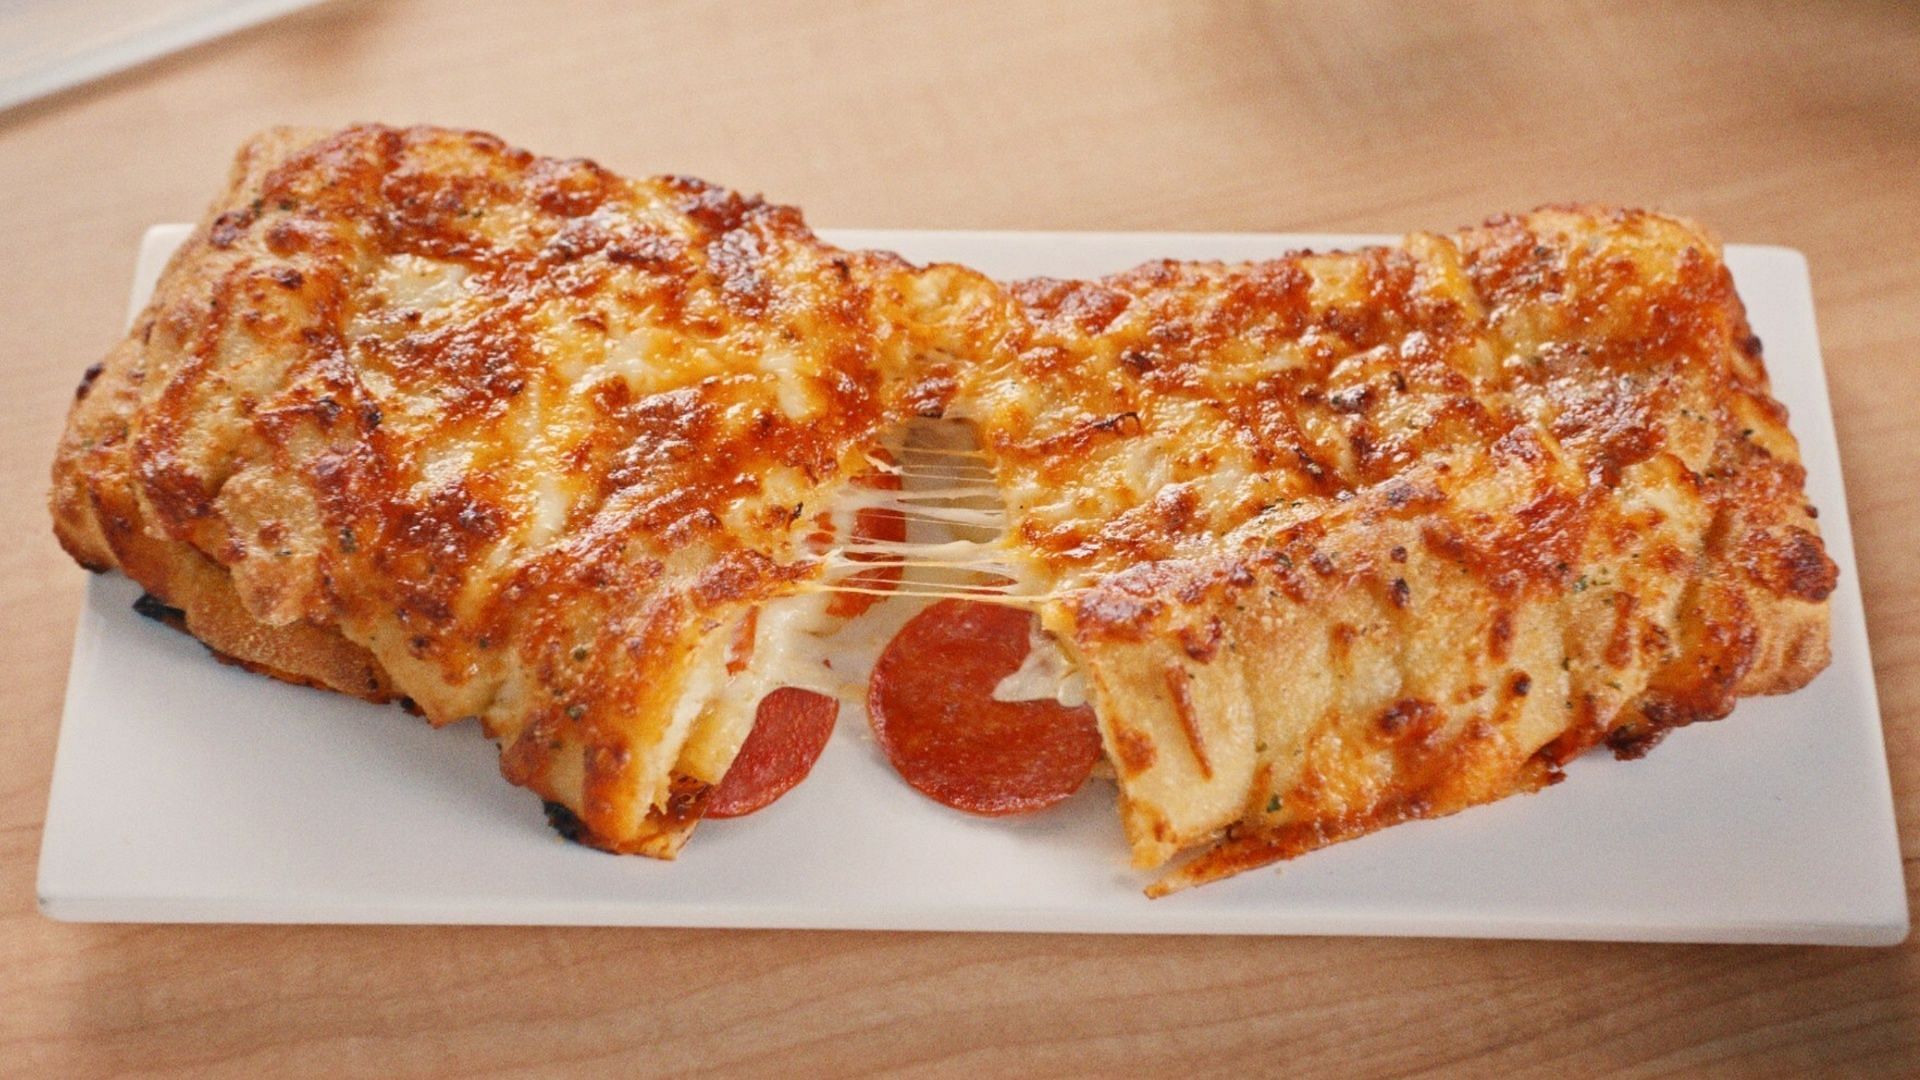 The new Pepperoni Stuffed Cheesy Bread comes loaded with cheese and pepperoni (Imagee via Domino&rsquo;s)